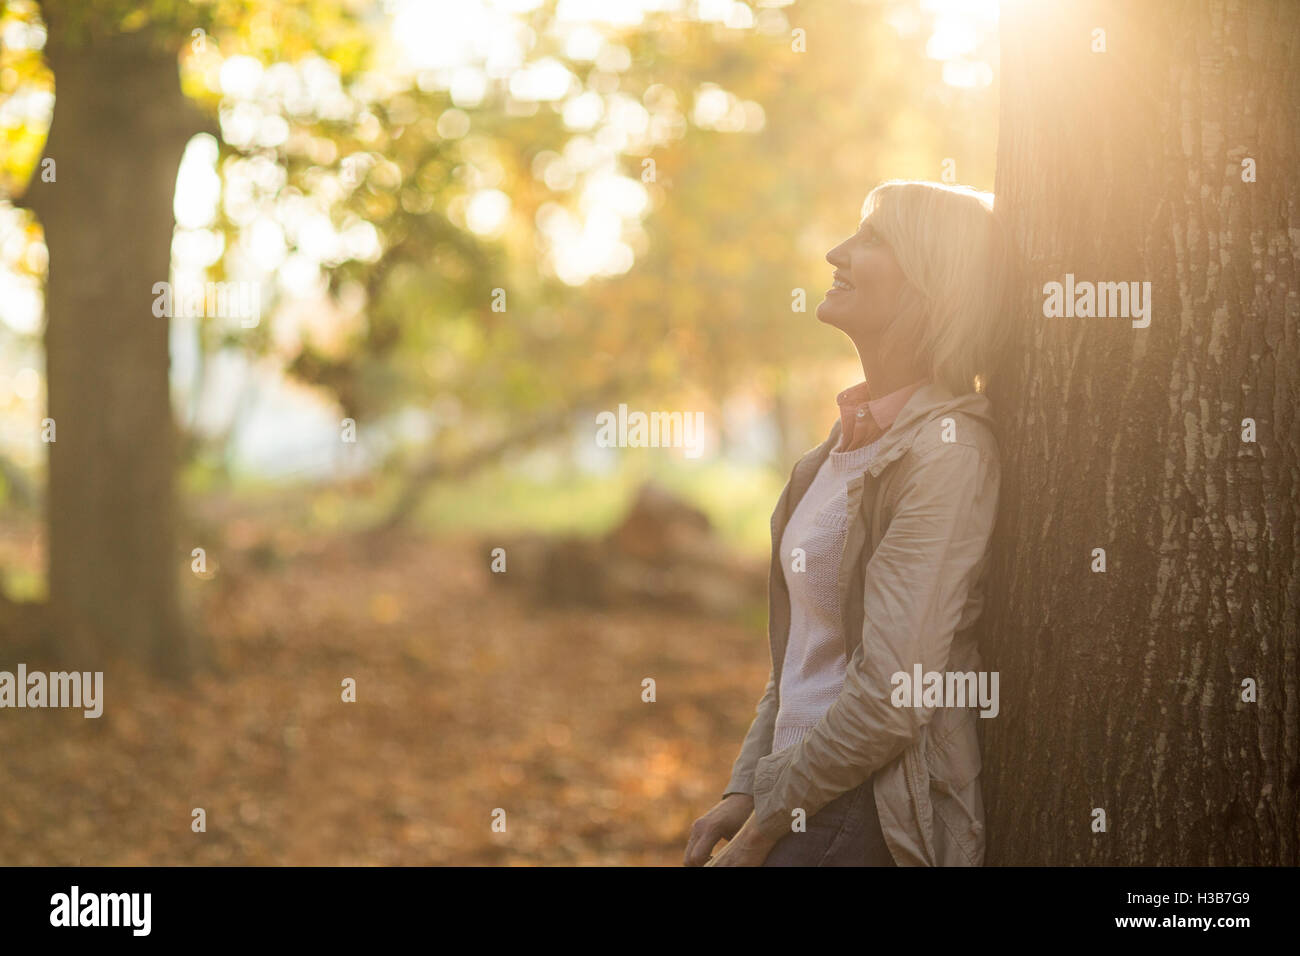 Mature woman leaning on tree in forest Stock Photo